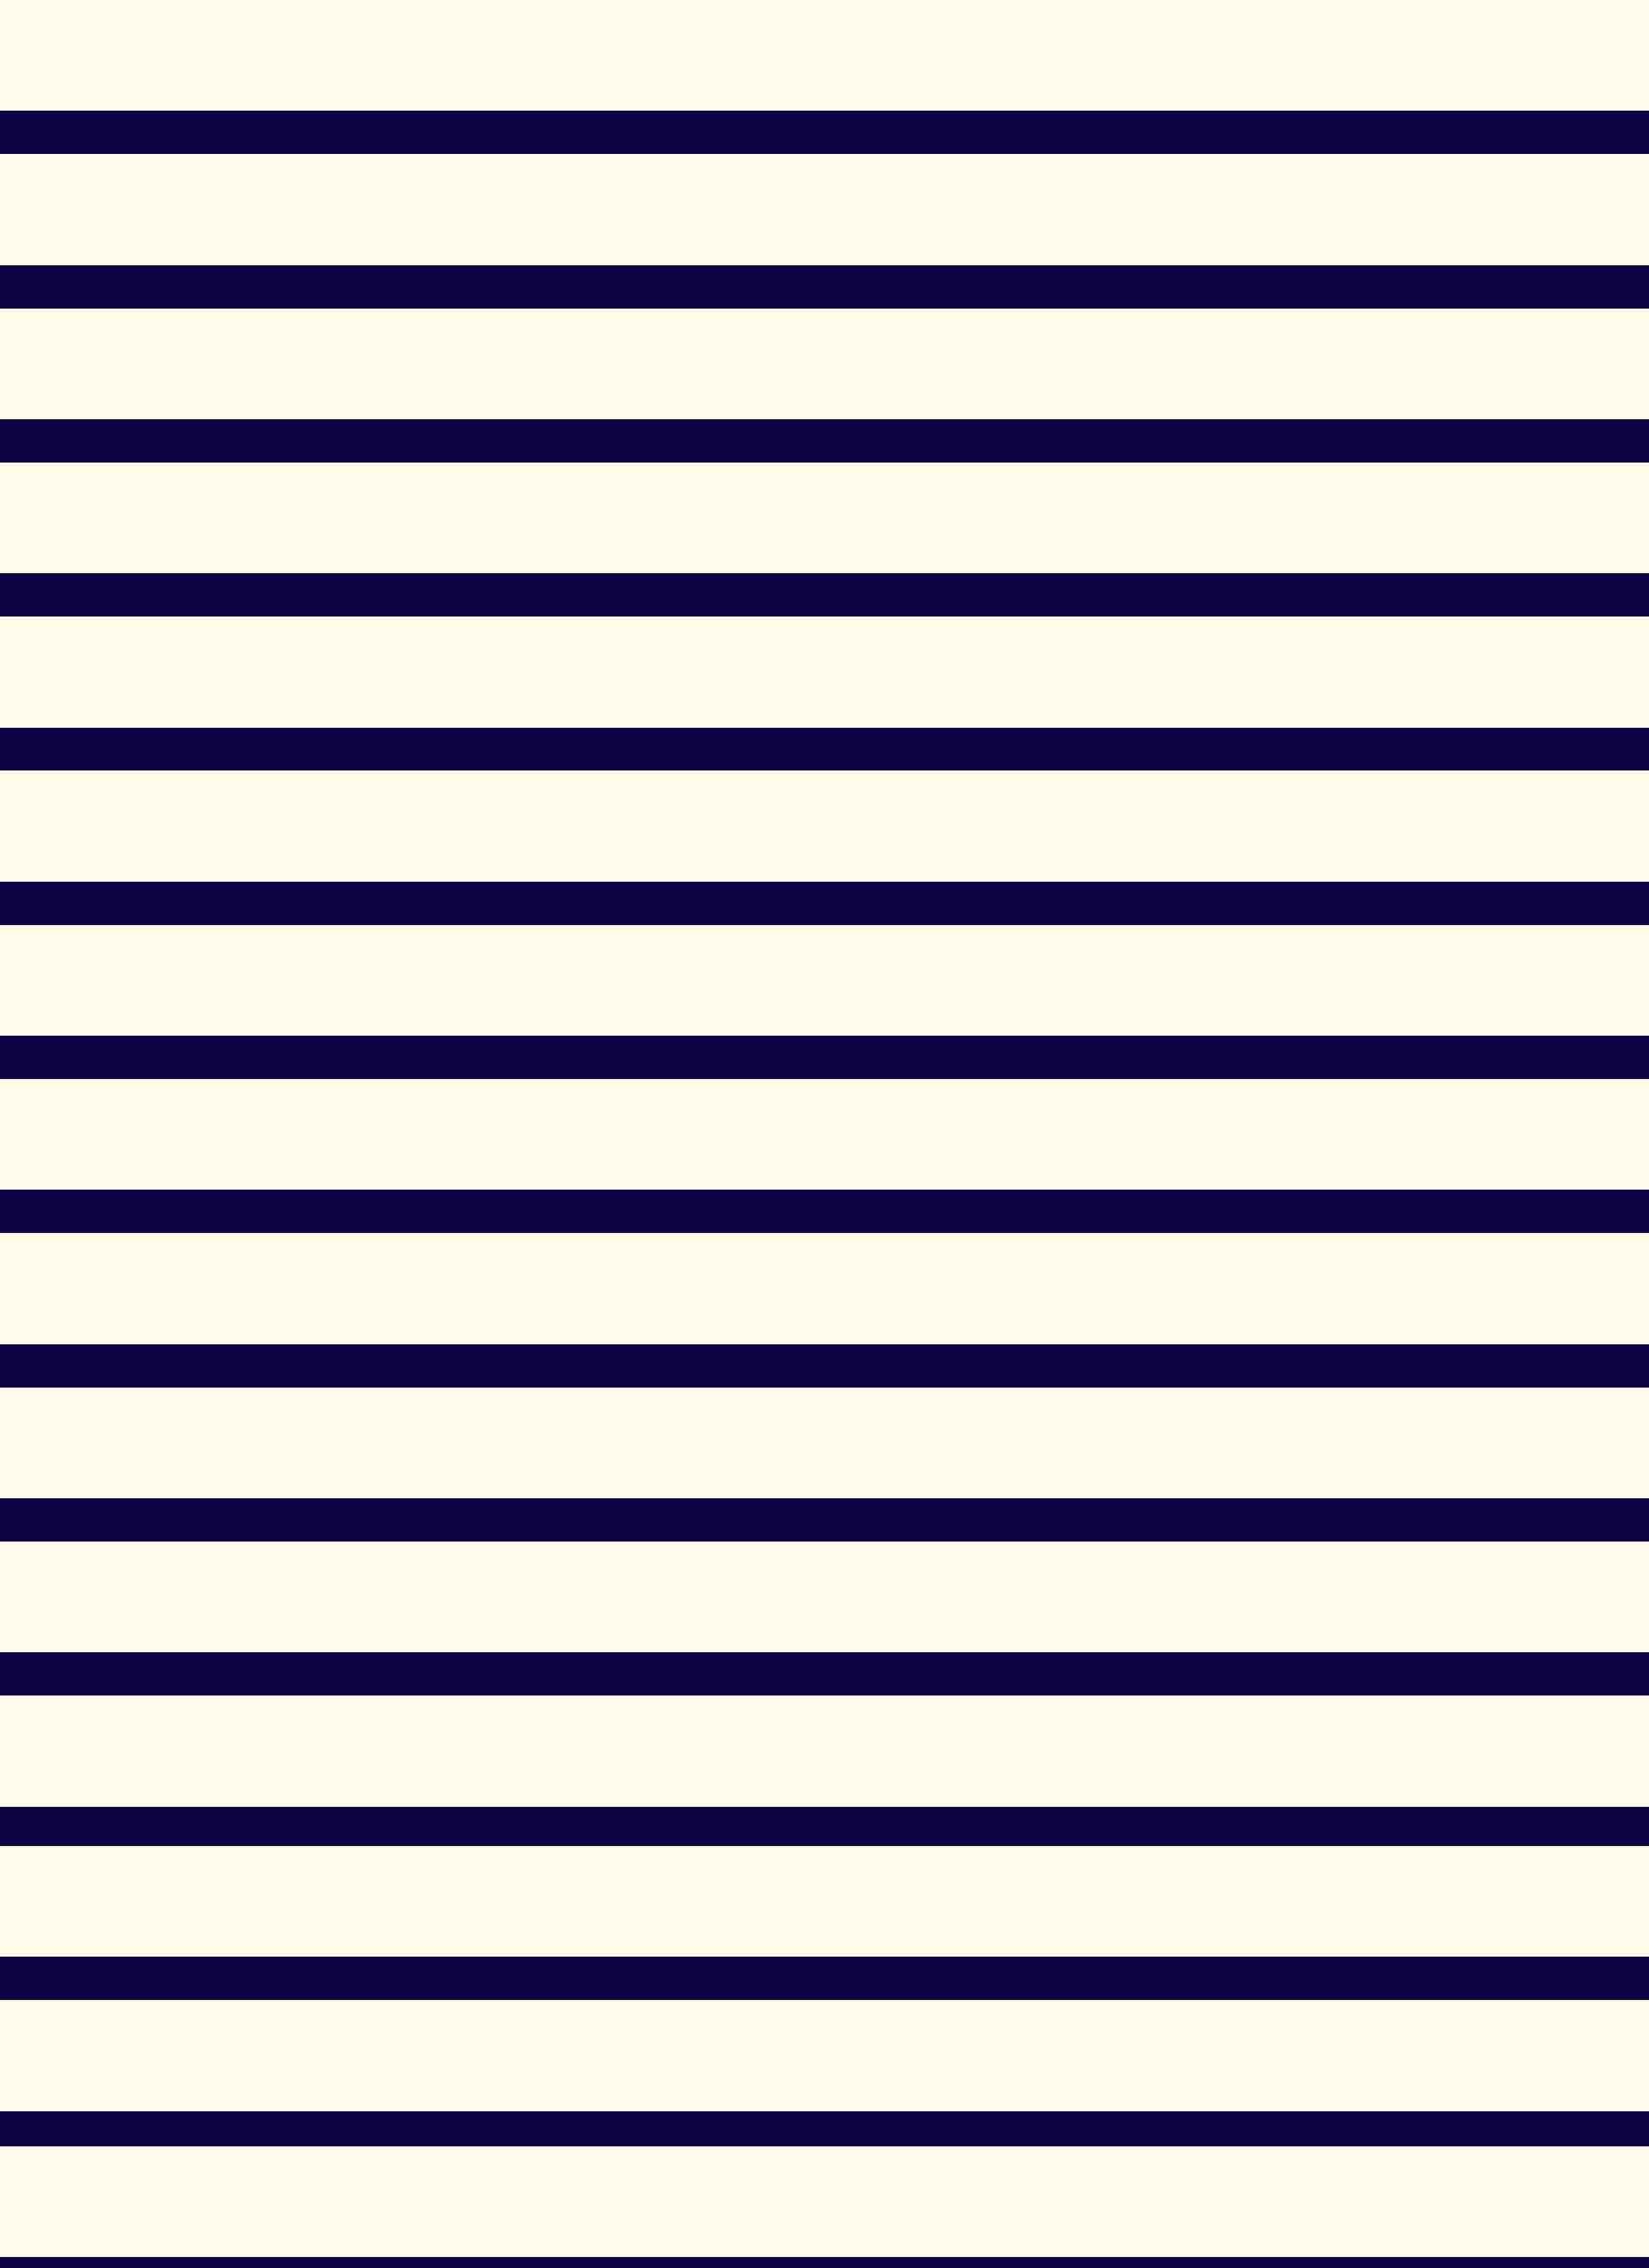 Iphone Background Navy Stripes - 2400x3300 Wallpaper 